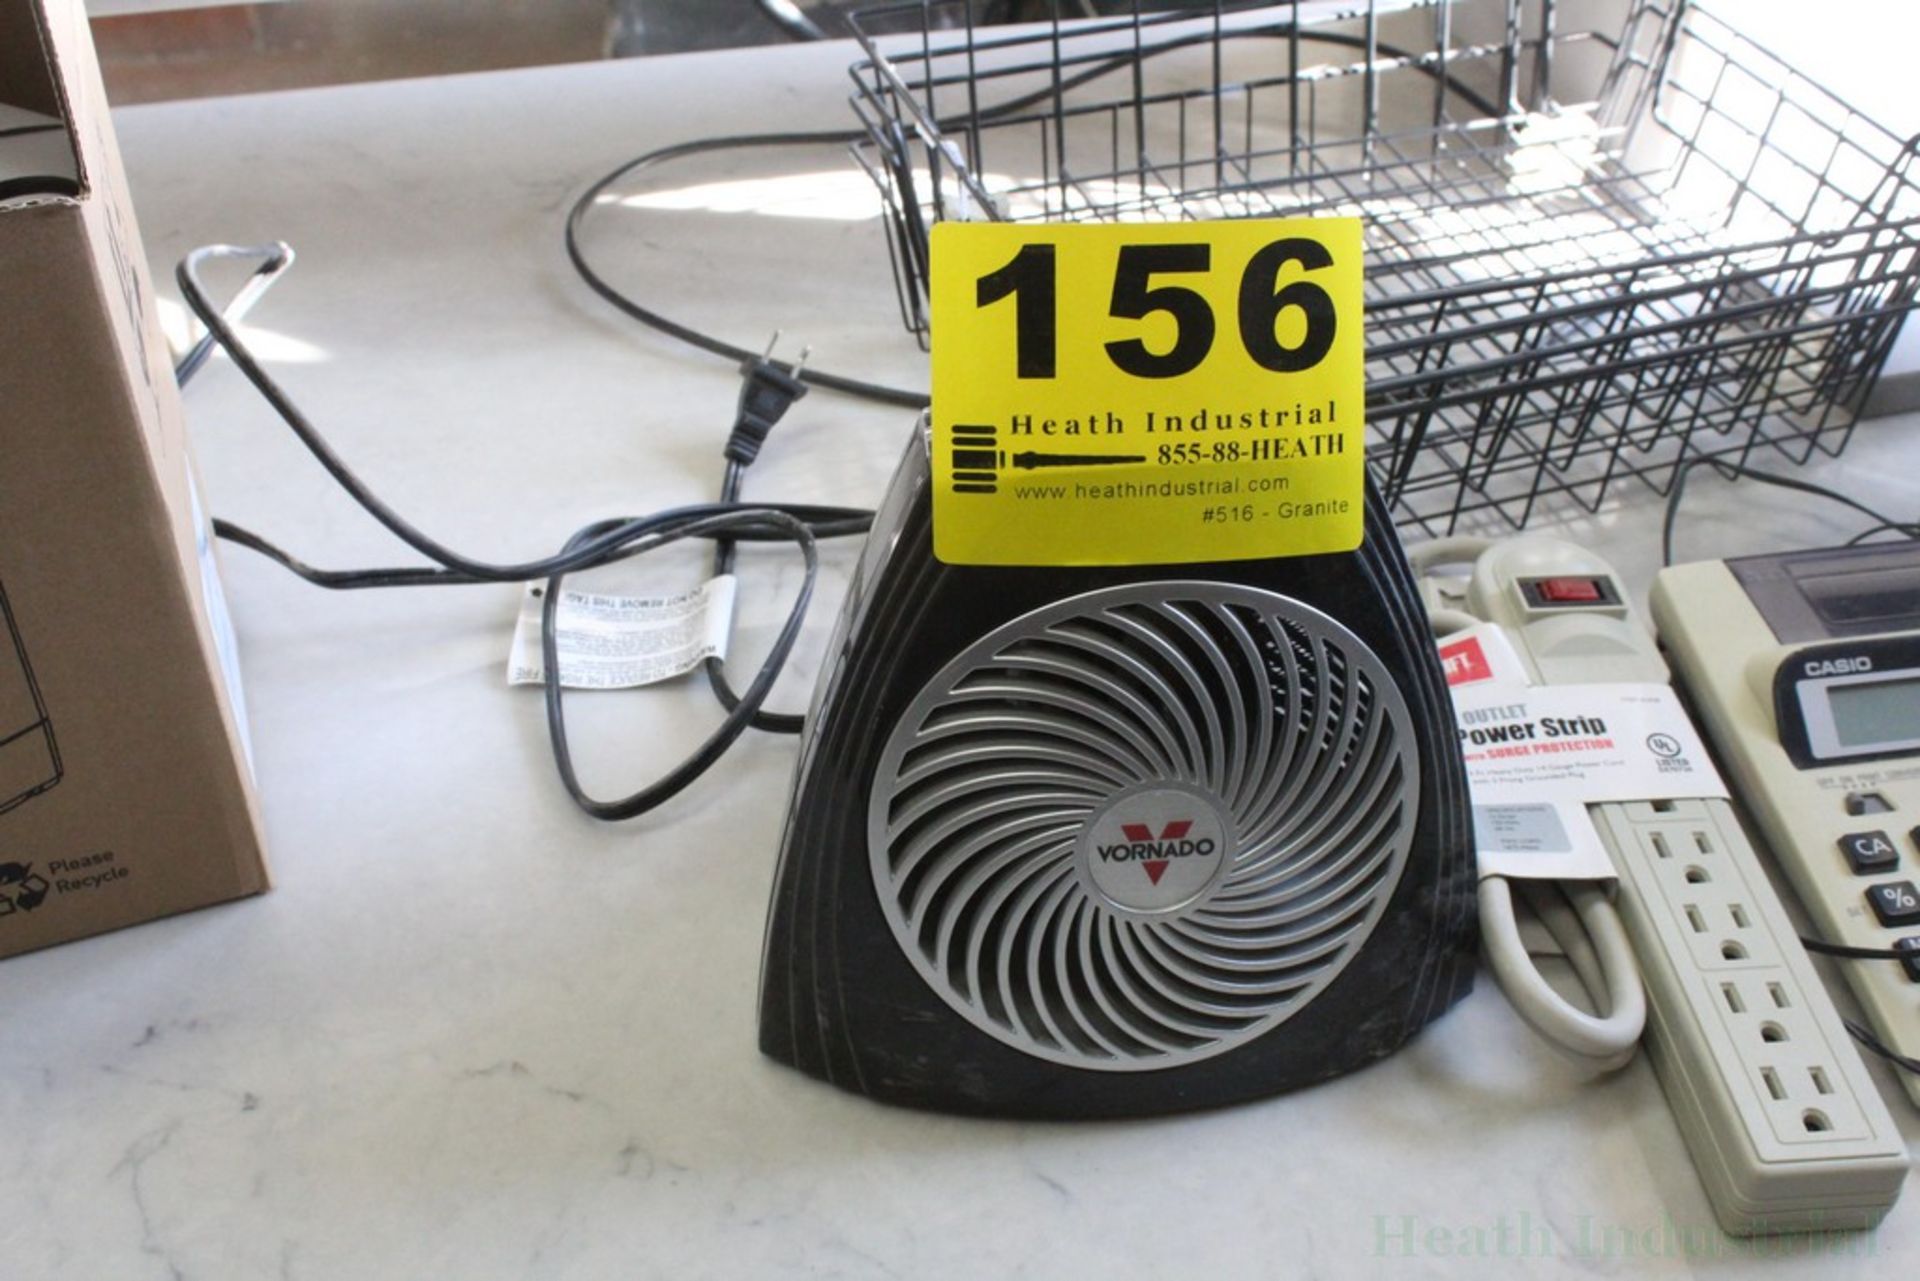 VORNADO FAN WITH ASSORTED OFFICE SUPPLIES